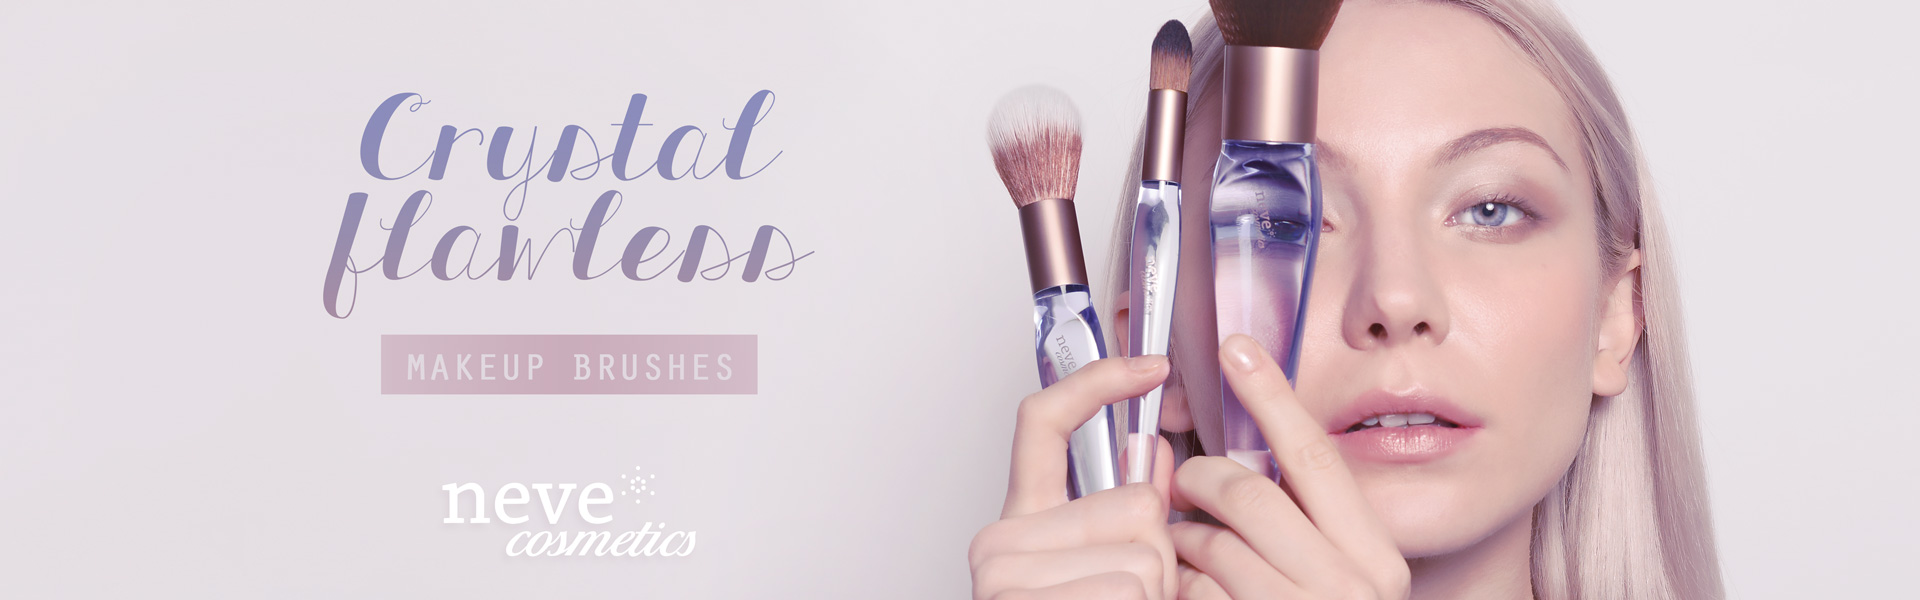 cRYSTAL fLAWLESS bRUSHES